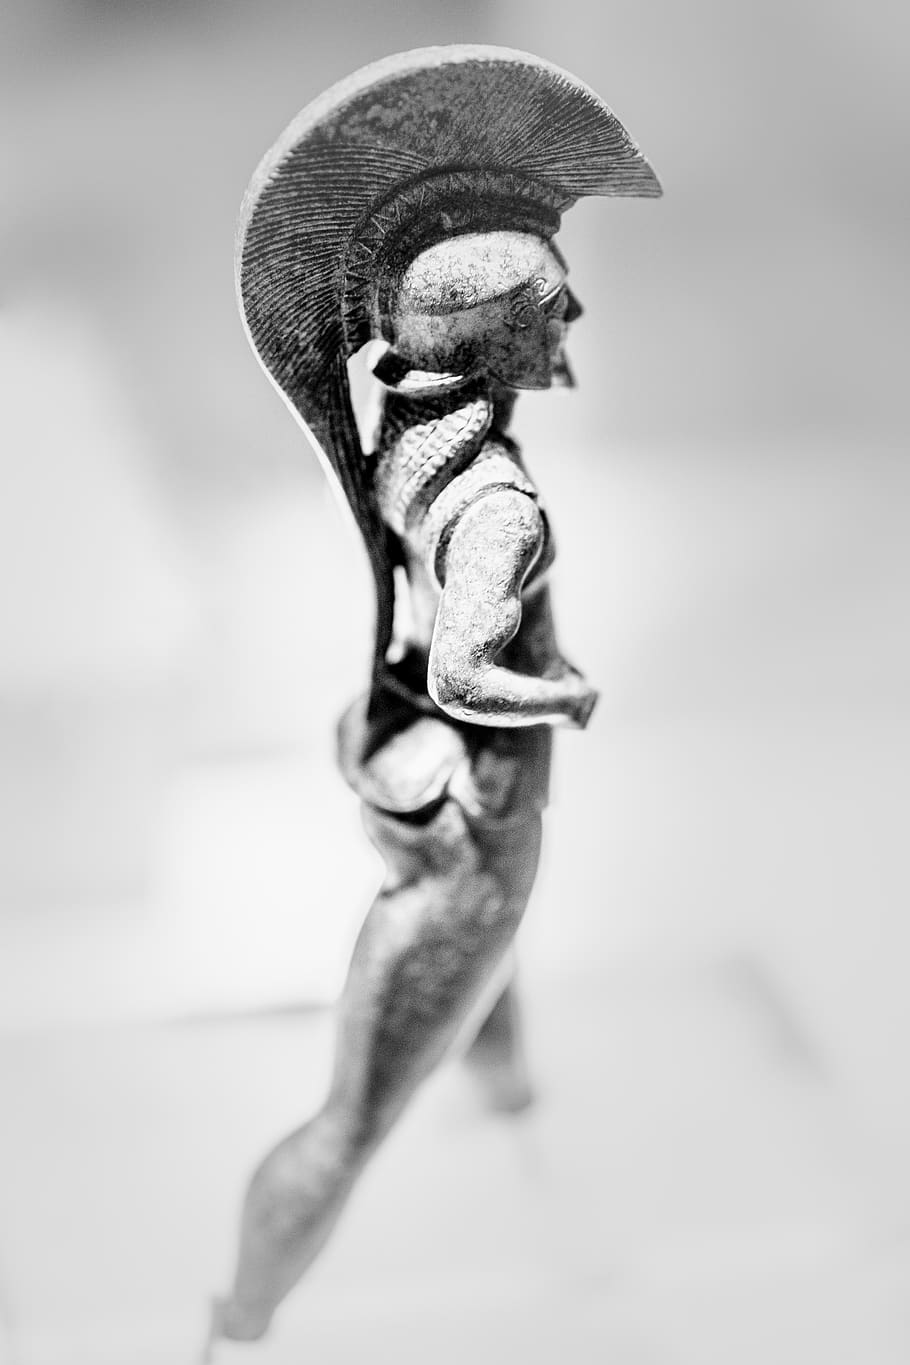 spartan, private, statuette, black and white, ancient greece, museum, brass, sparta, studio shot, indoors